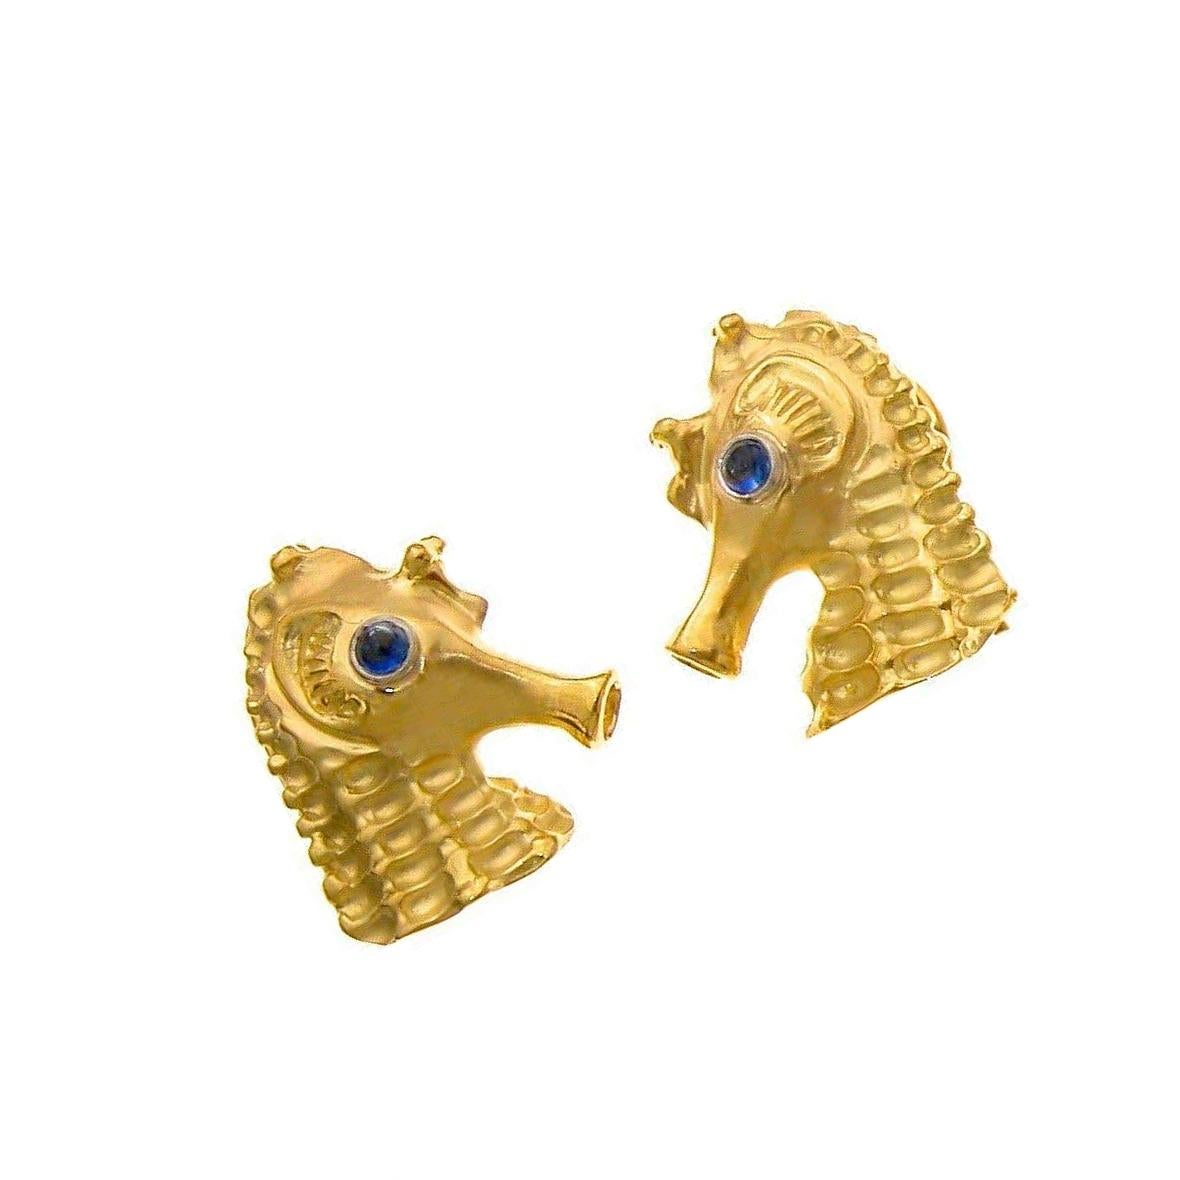 Sapphire Eyes 18 Karat Gold SEAHORSE Cufflinks by John Landrum Bryant In New Condition For Sale In New York, NY